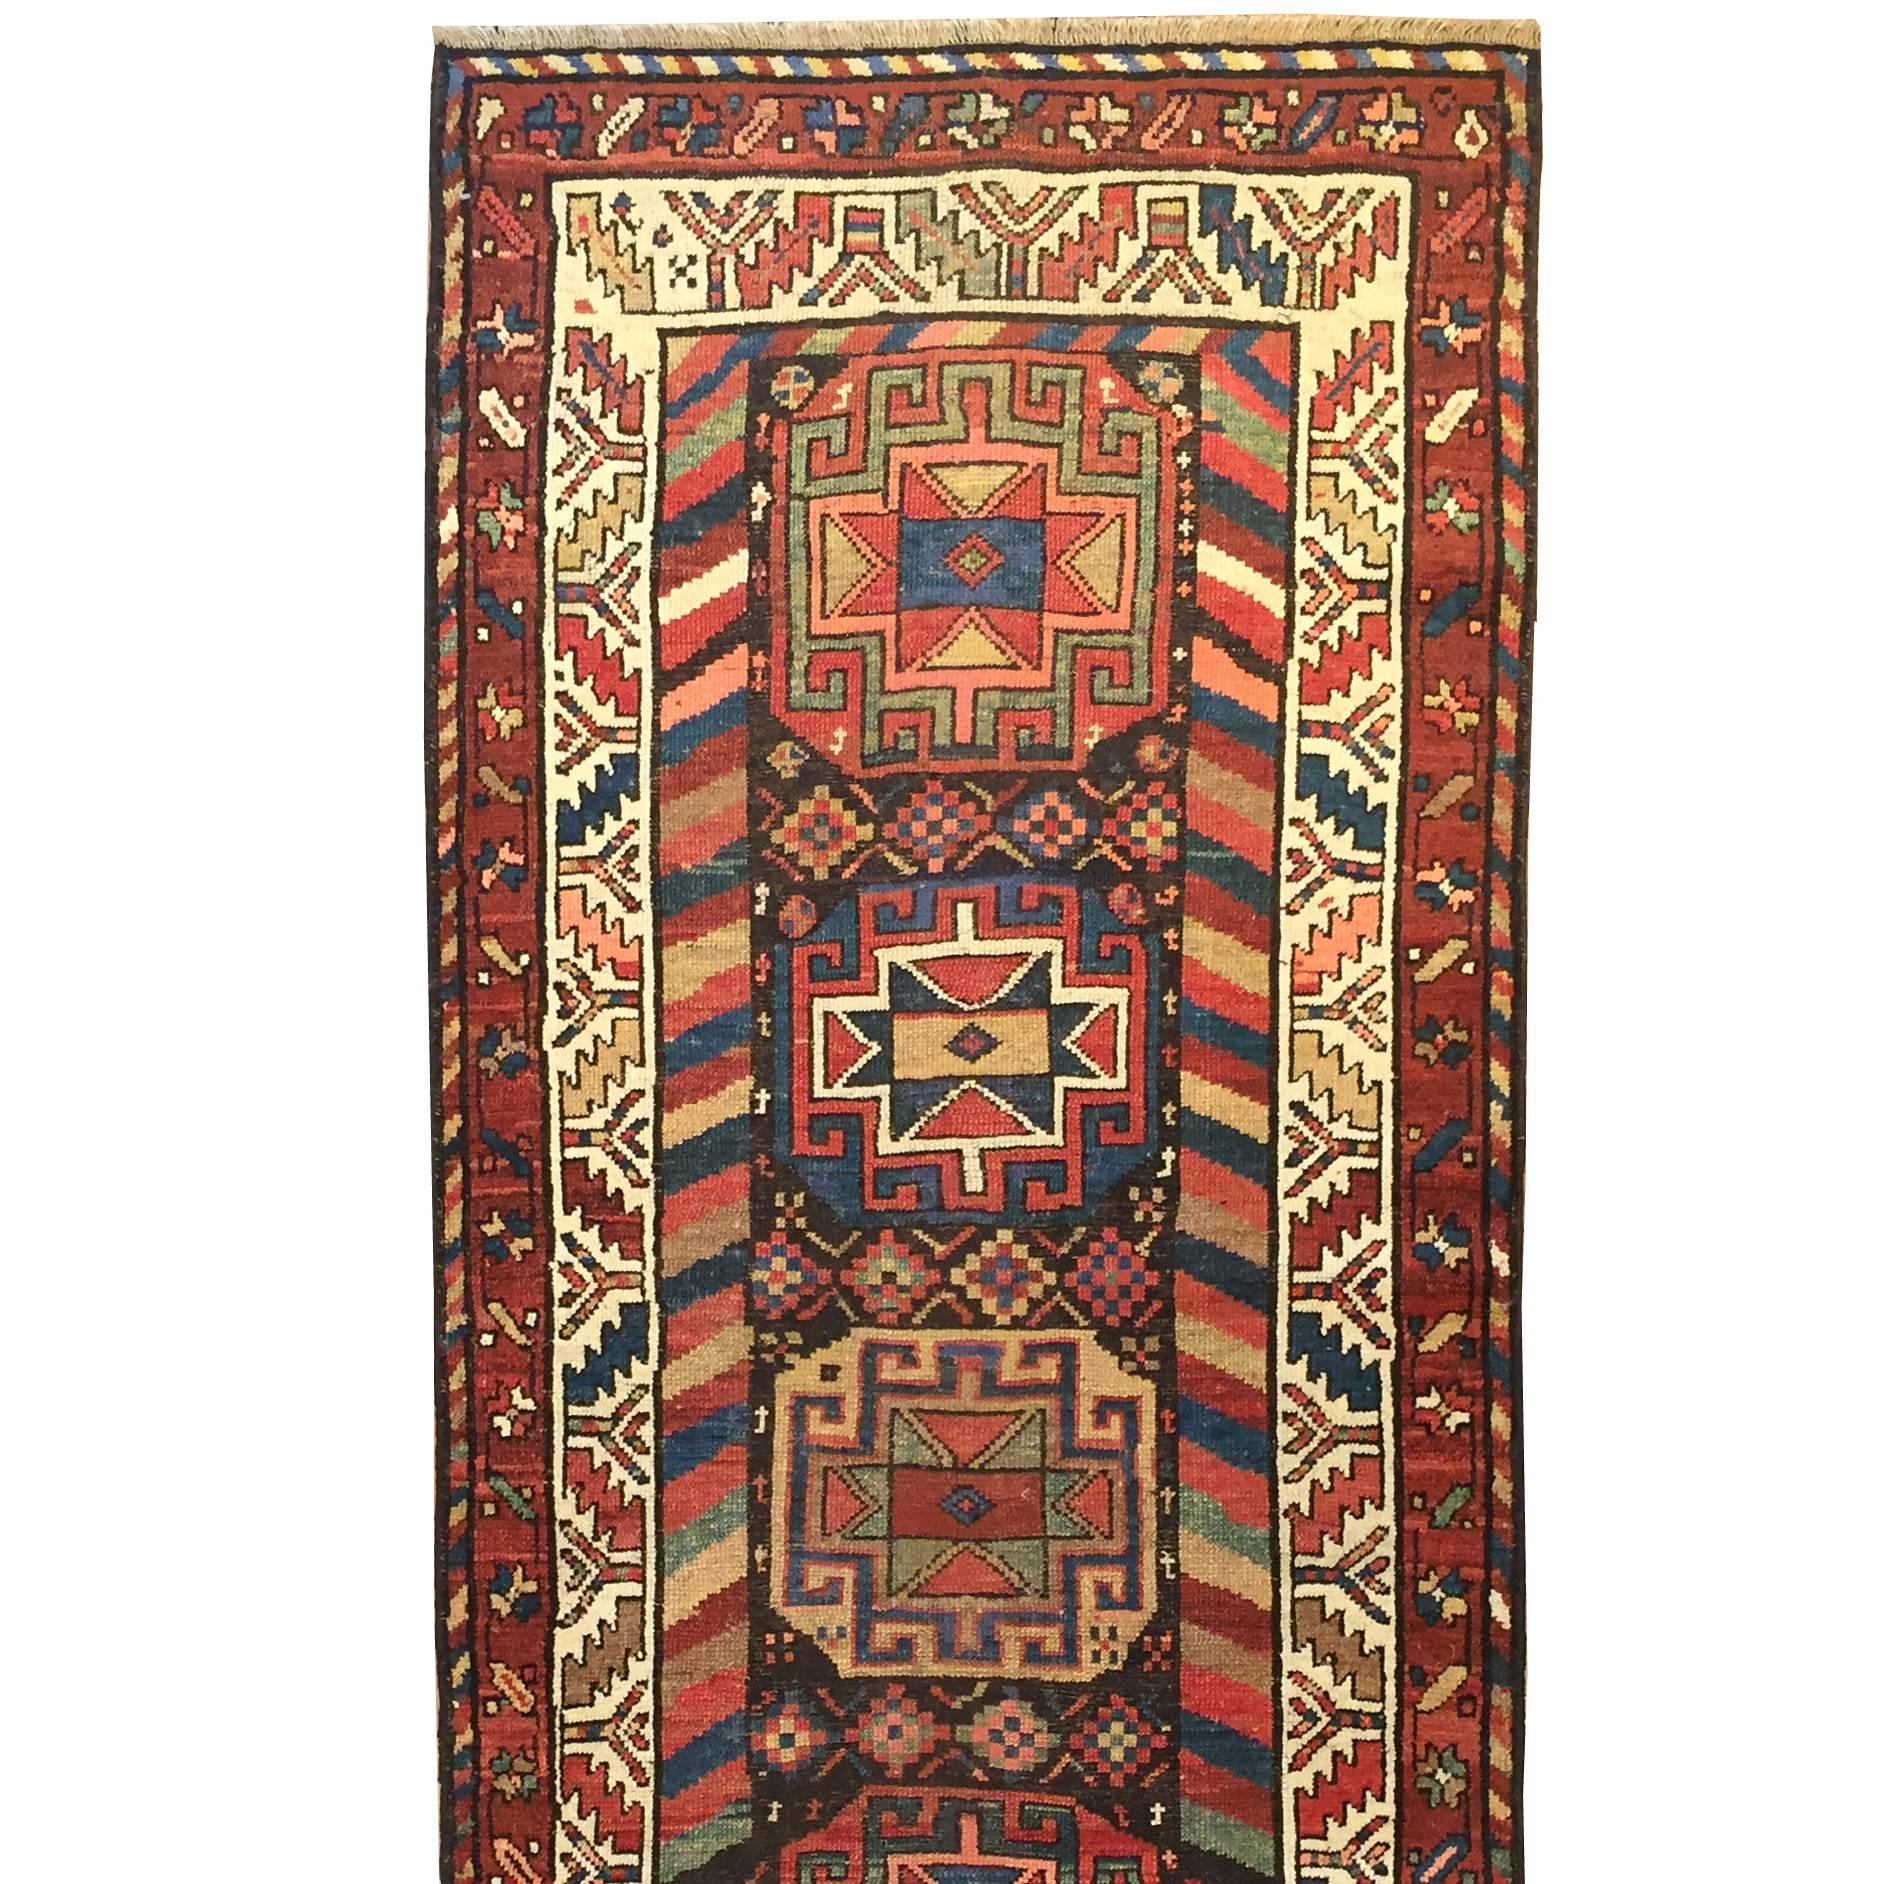 A late 19th century Persian Azeri runner with nine unique and wonderfully detailed multi-colored octagonal medallions with geometric designs in natural vegetable dyed crimson, indigo, emerald and saffron colors, surrounded by multiple complementary